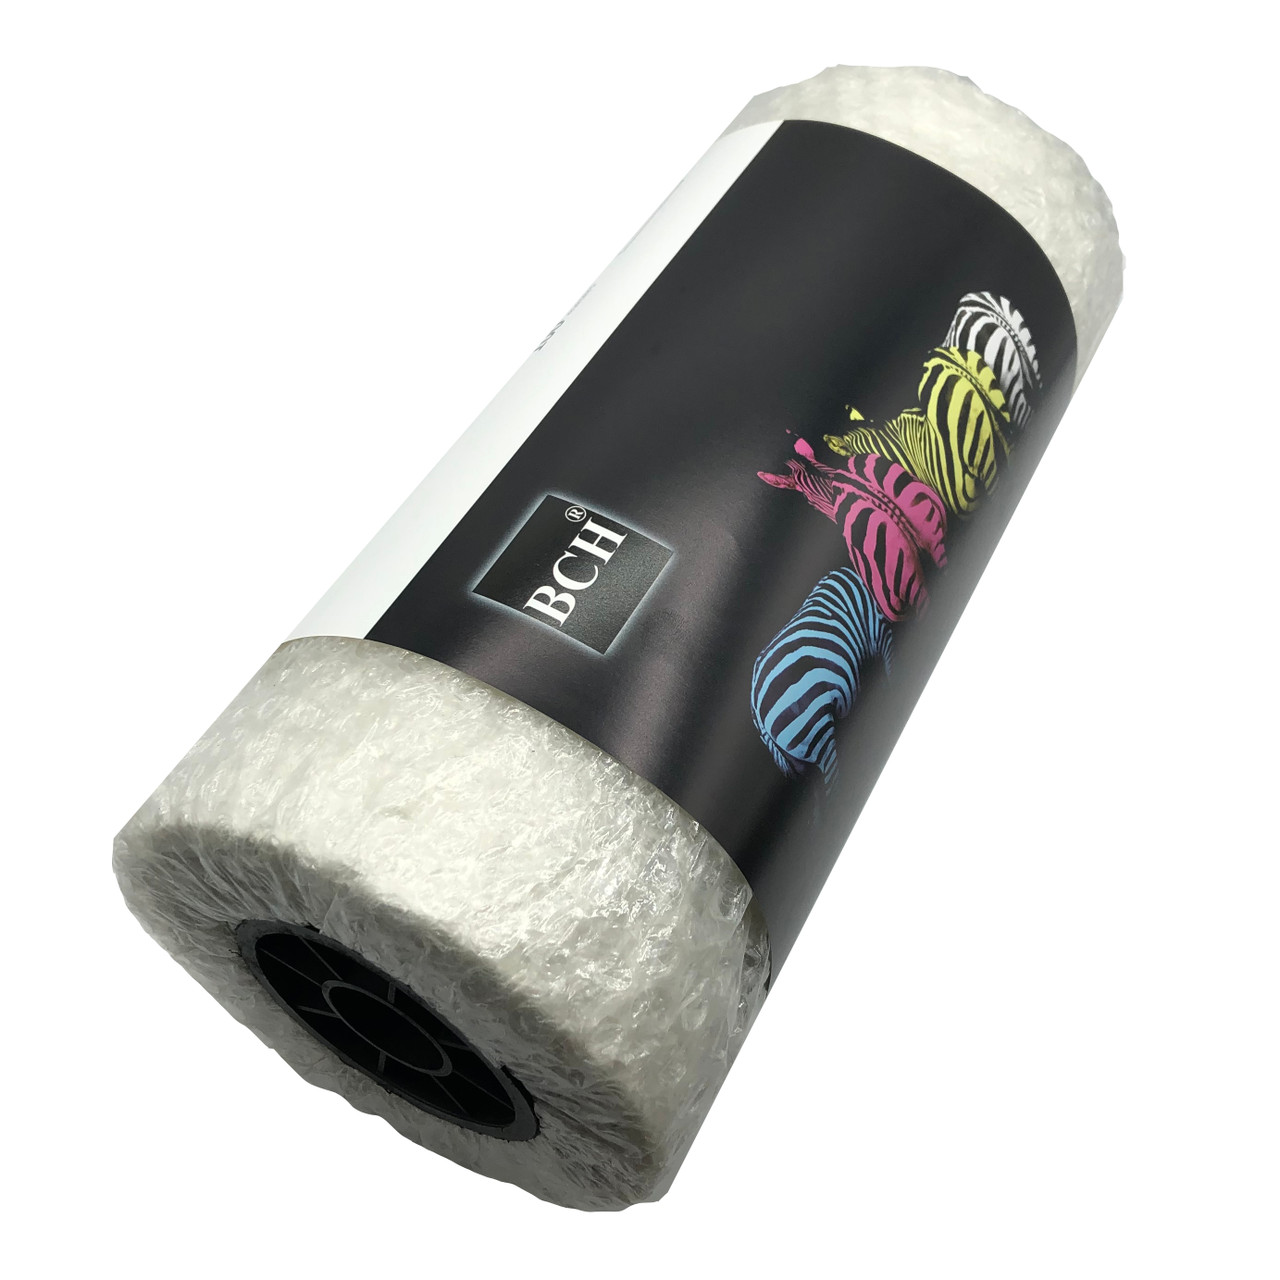 DTF Film 5 Layer Coated DTF Roll Film with Free Shipping on